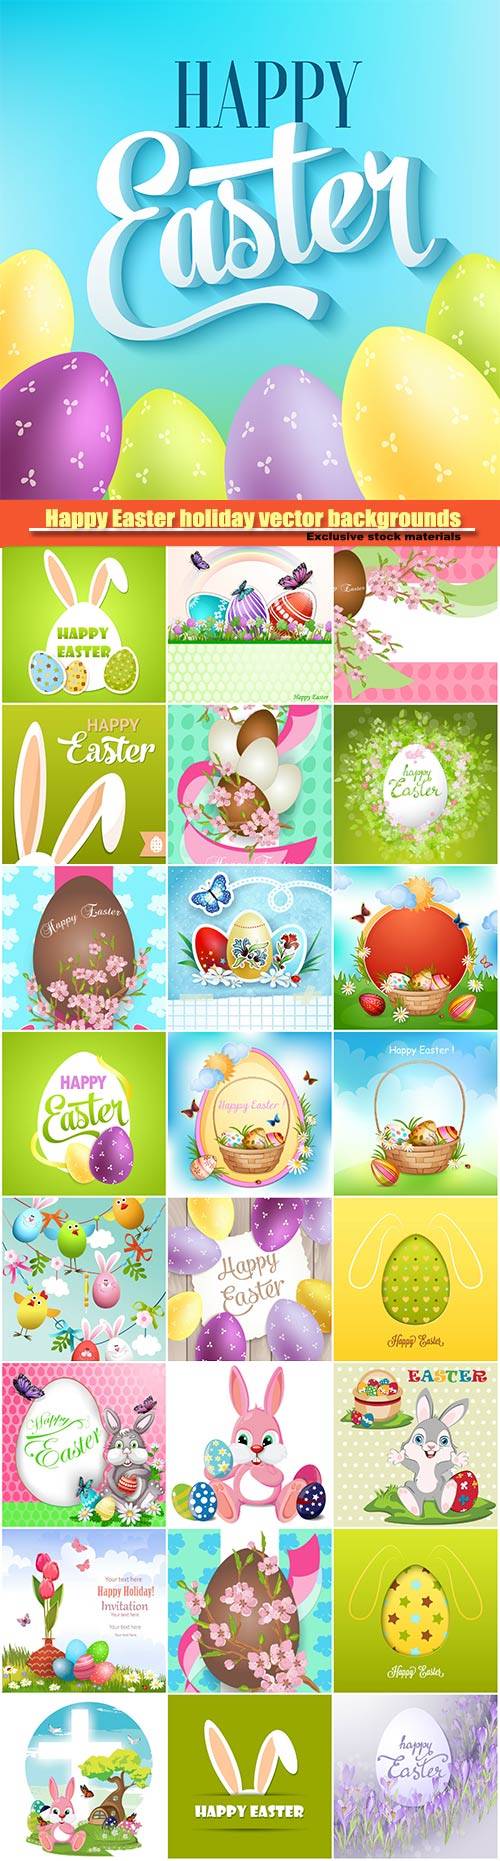 Happy Easter holiday vector backgrounds, Easter Eggs